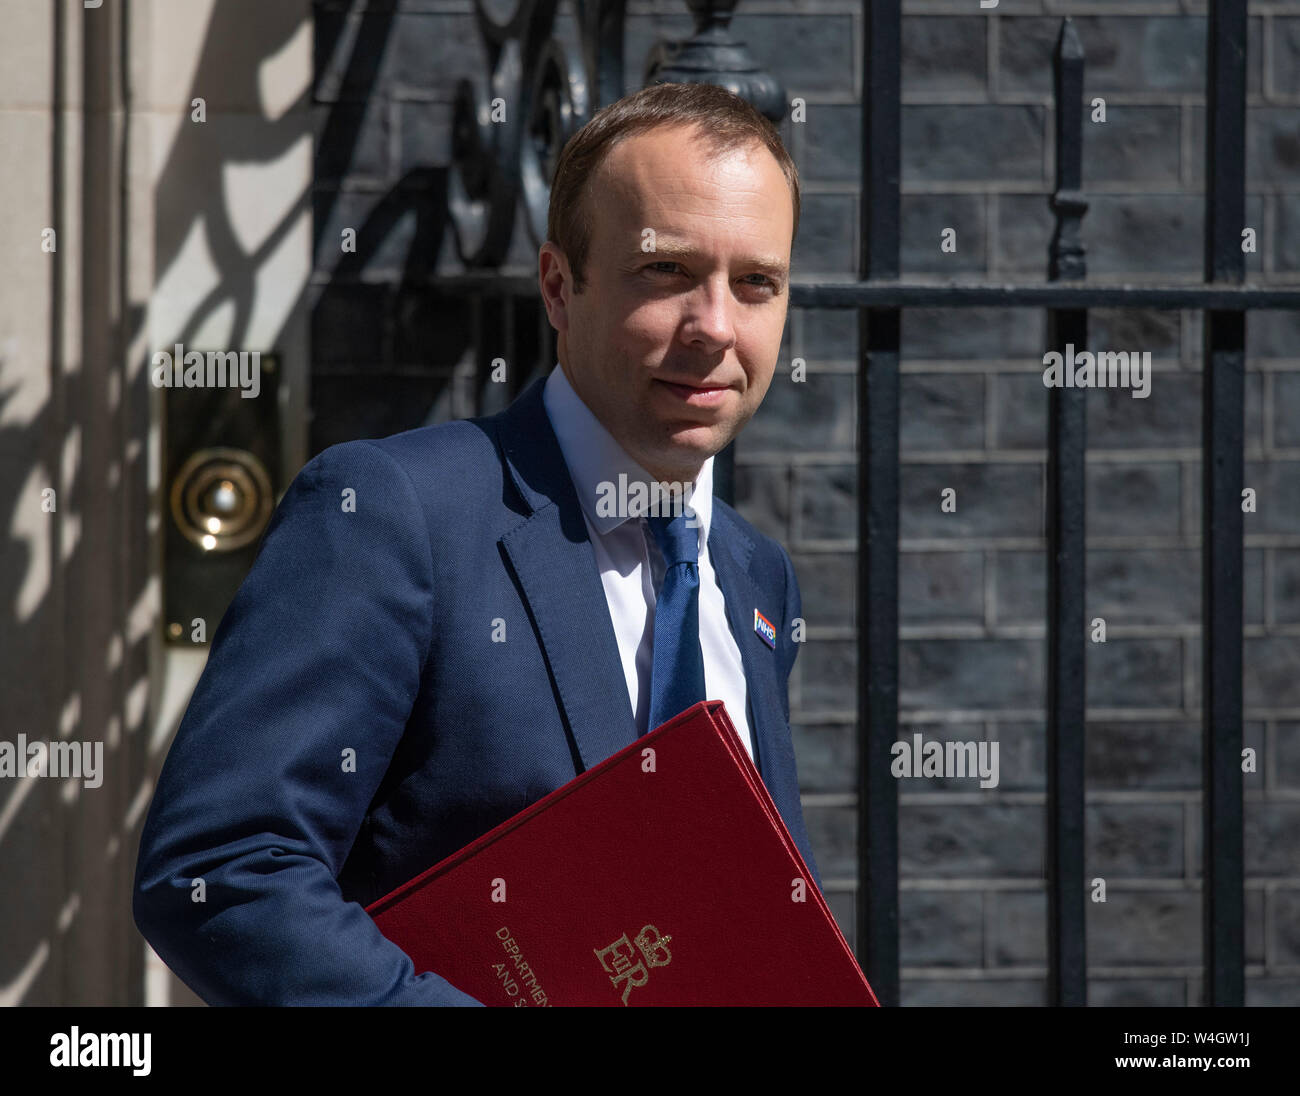 Downing Street, London, UK. 23rd July 2019. Matt Hancock, Secretary of State for Health and Social Care, leaves 10 Downing Street after final cabinet meeting chaired by PM Theresa May and before Boris Johnson is announced as new PM. Credit: Malcolm Park/Alamy Live News. Stock Photo